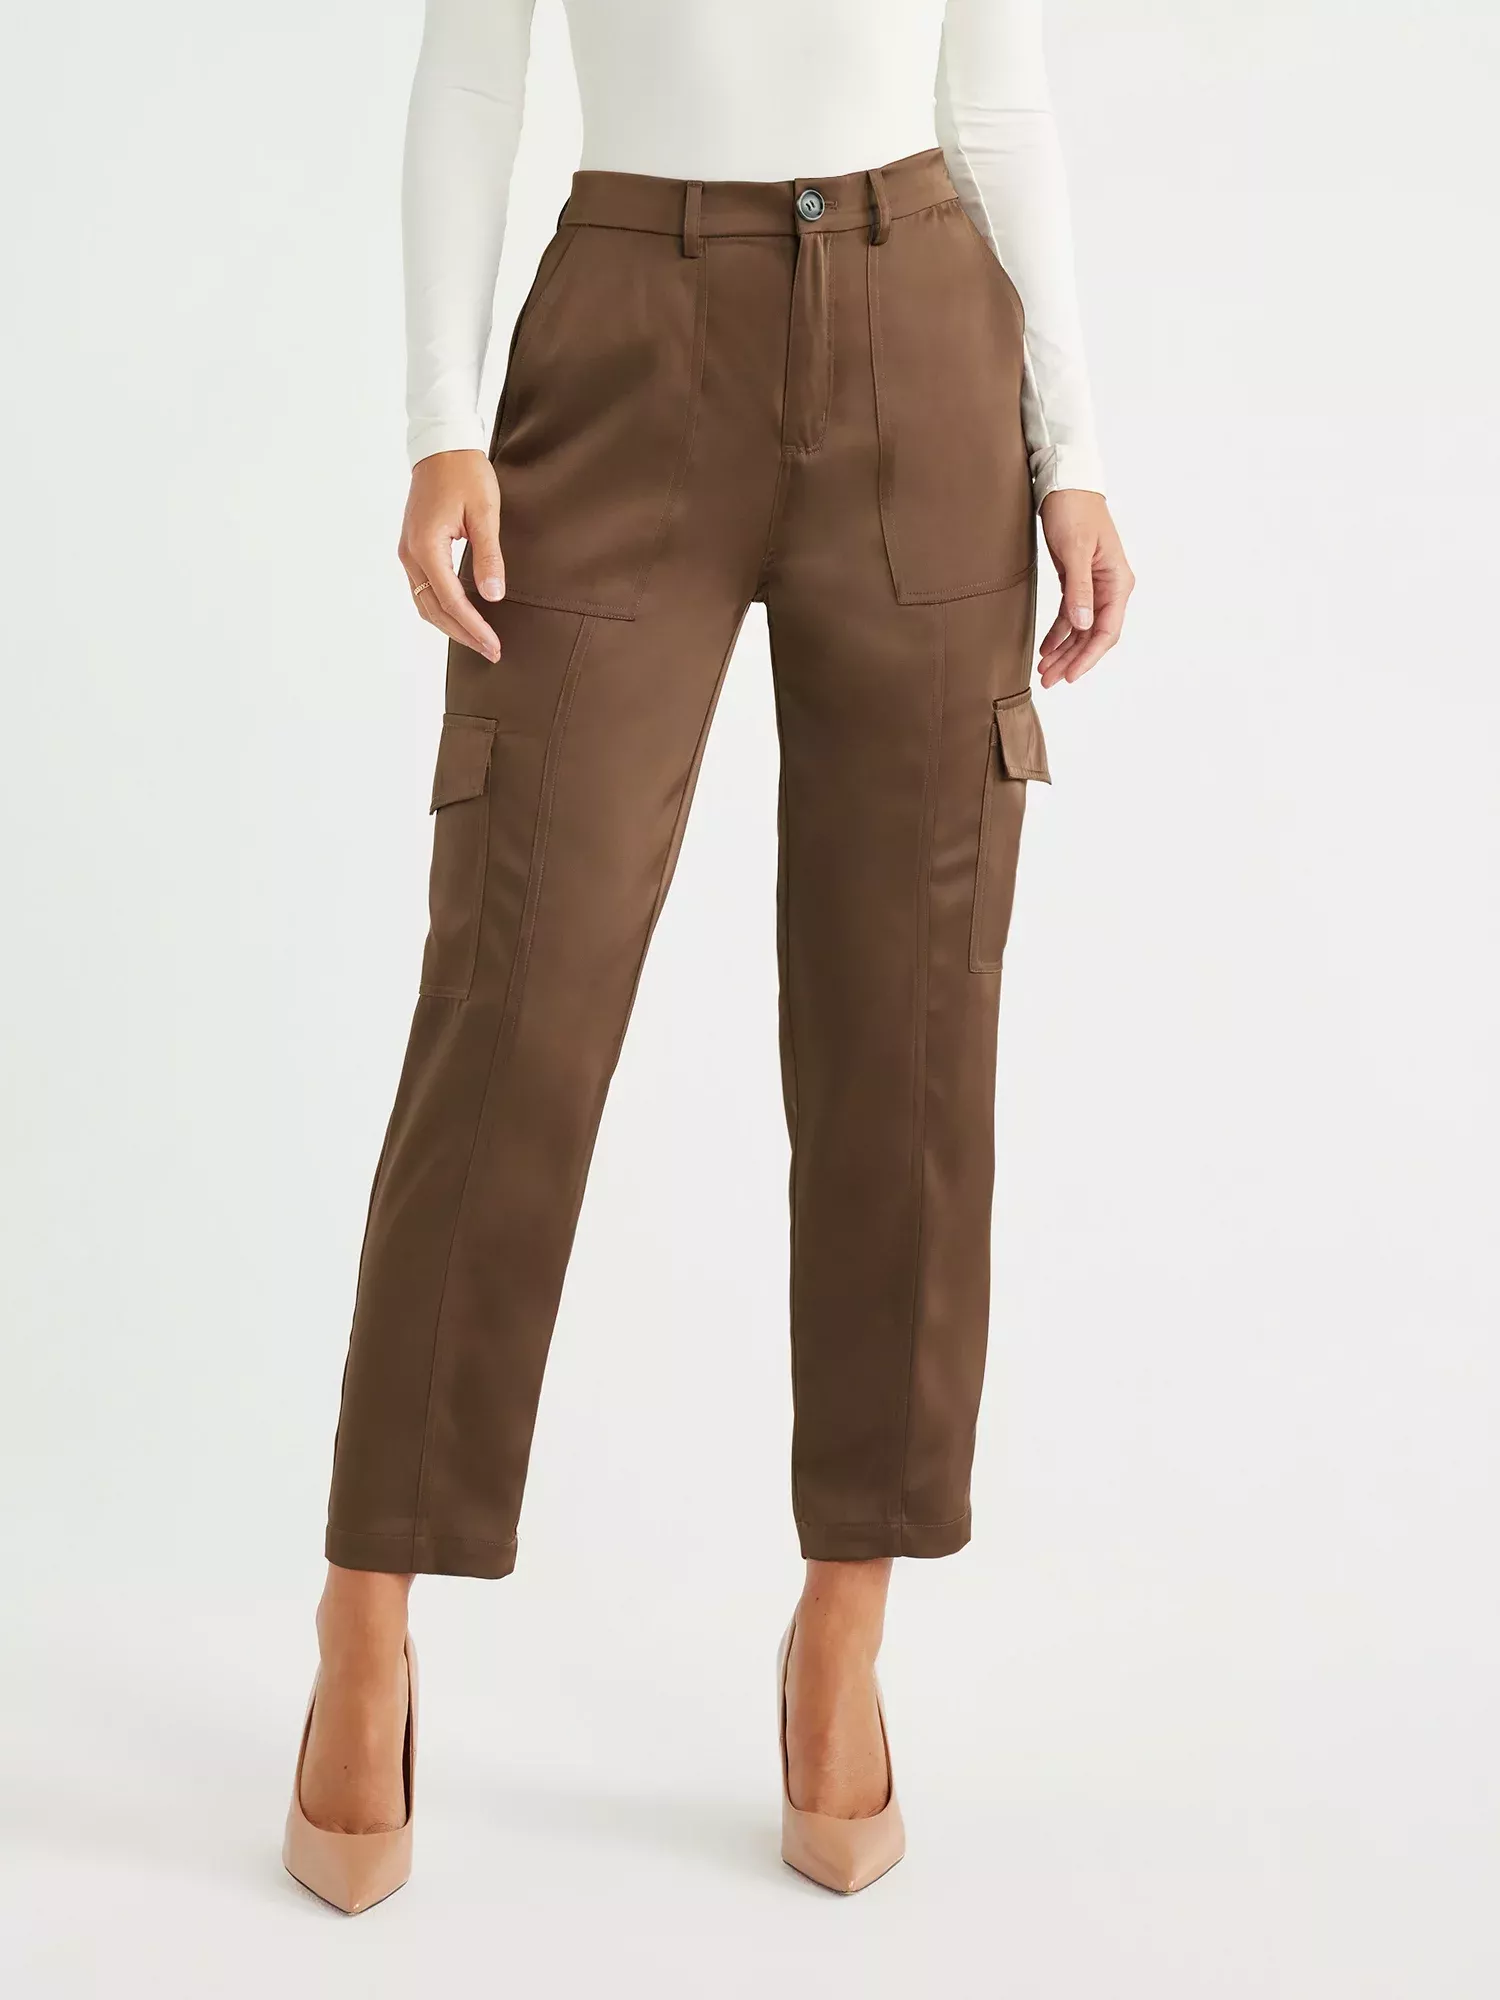 Sofia Jeans Women's Super High Rise Luxe Cargo Pants, 27 Inseam